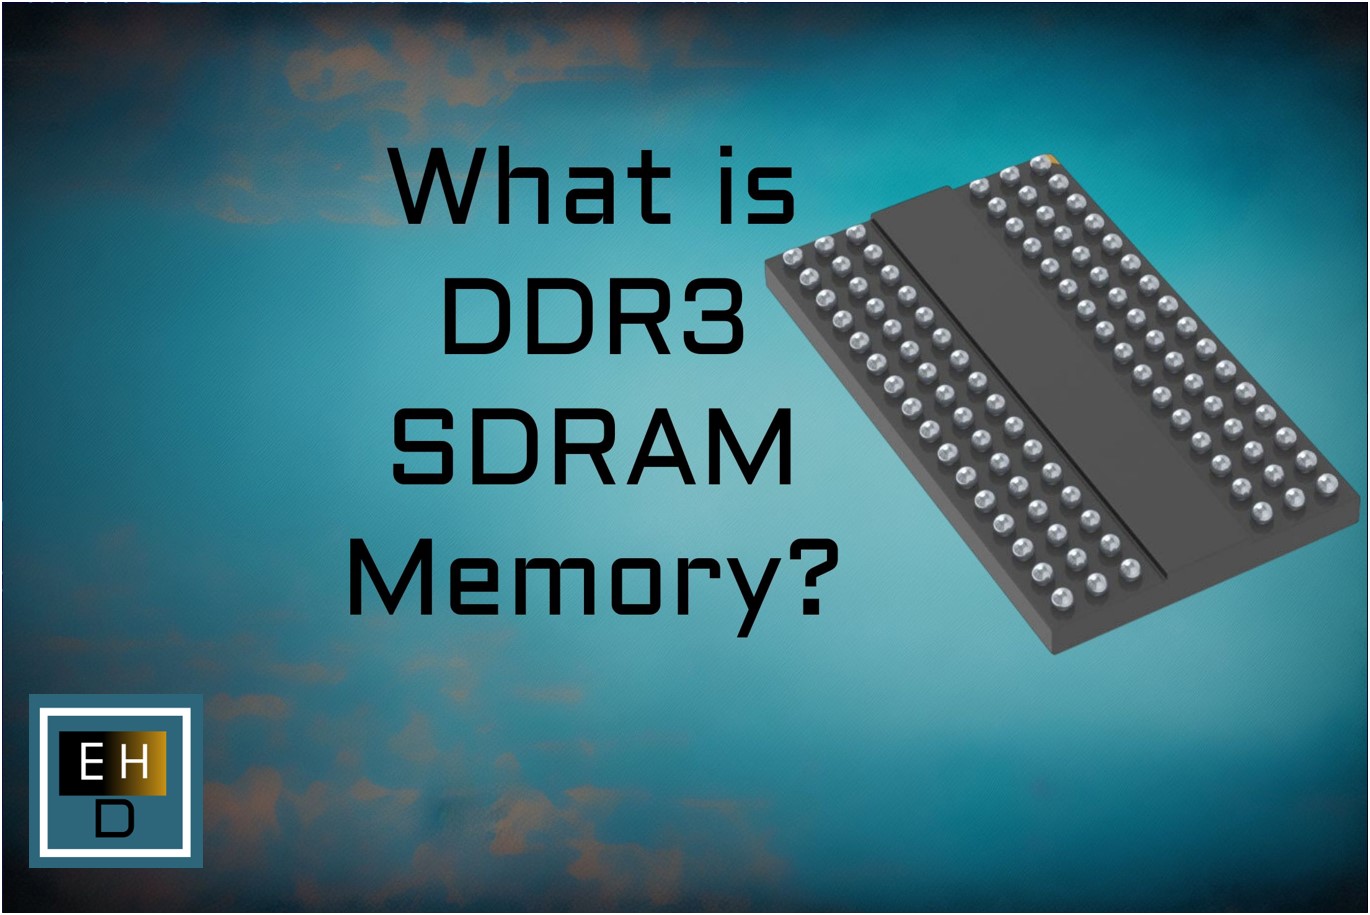 What is DDR3 SDRAM Memory